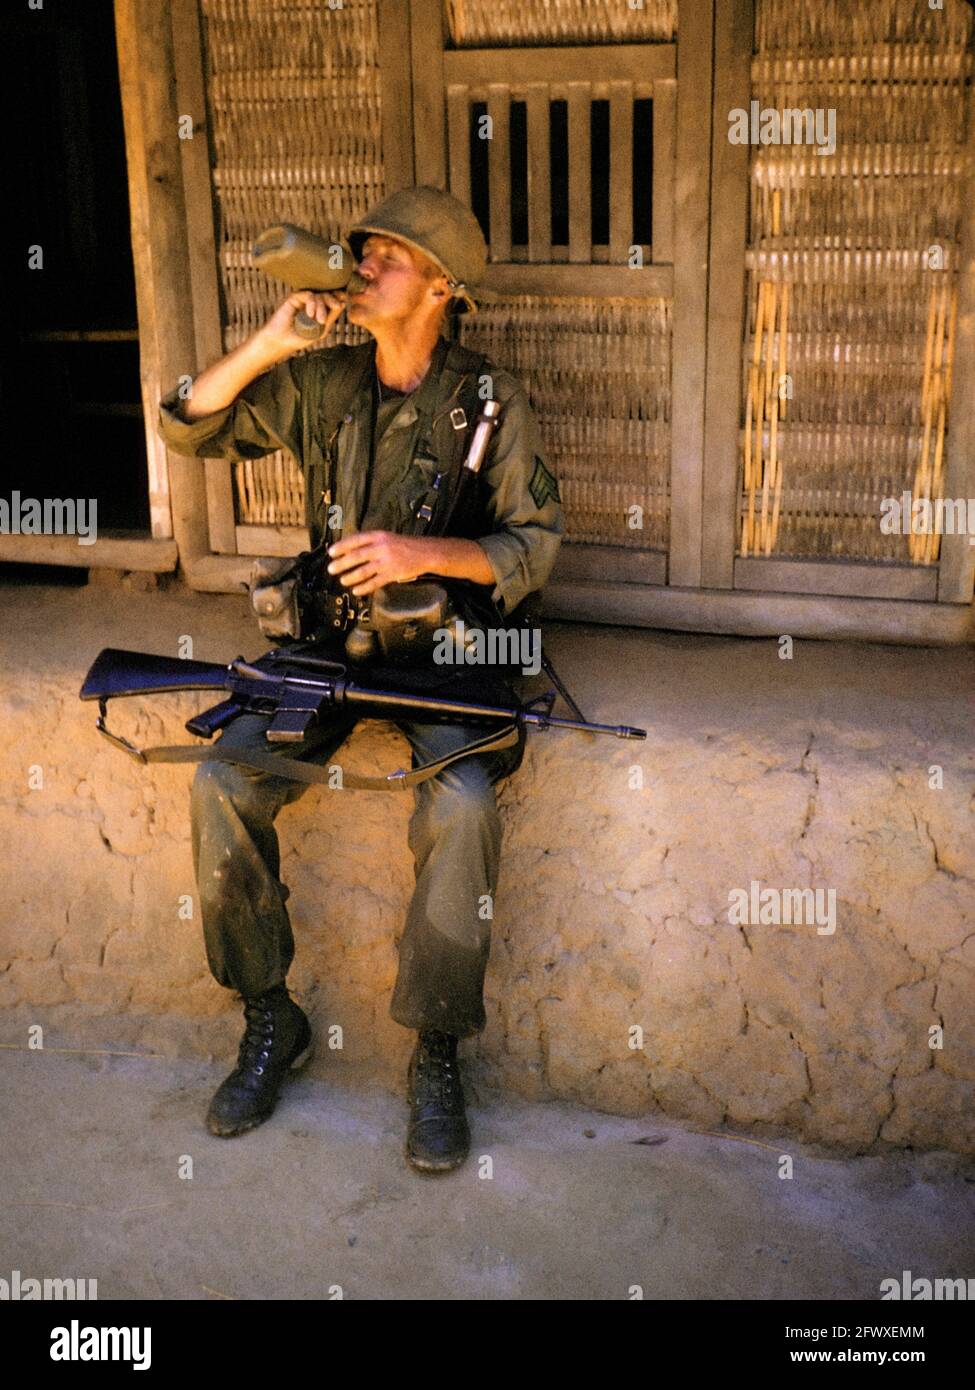 Sergeant Drinking from Canteen; Vietnam; 1965 Stock Photo